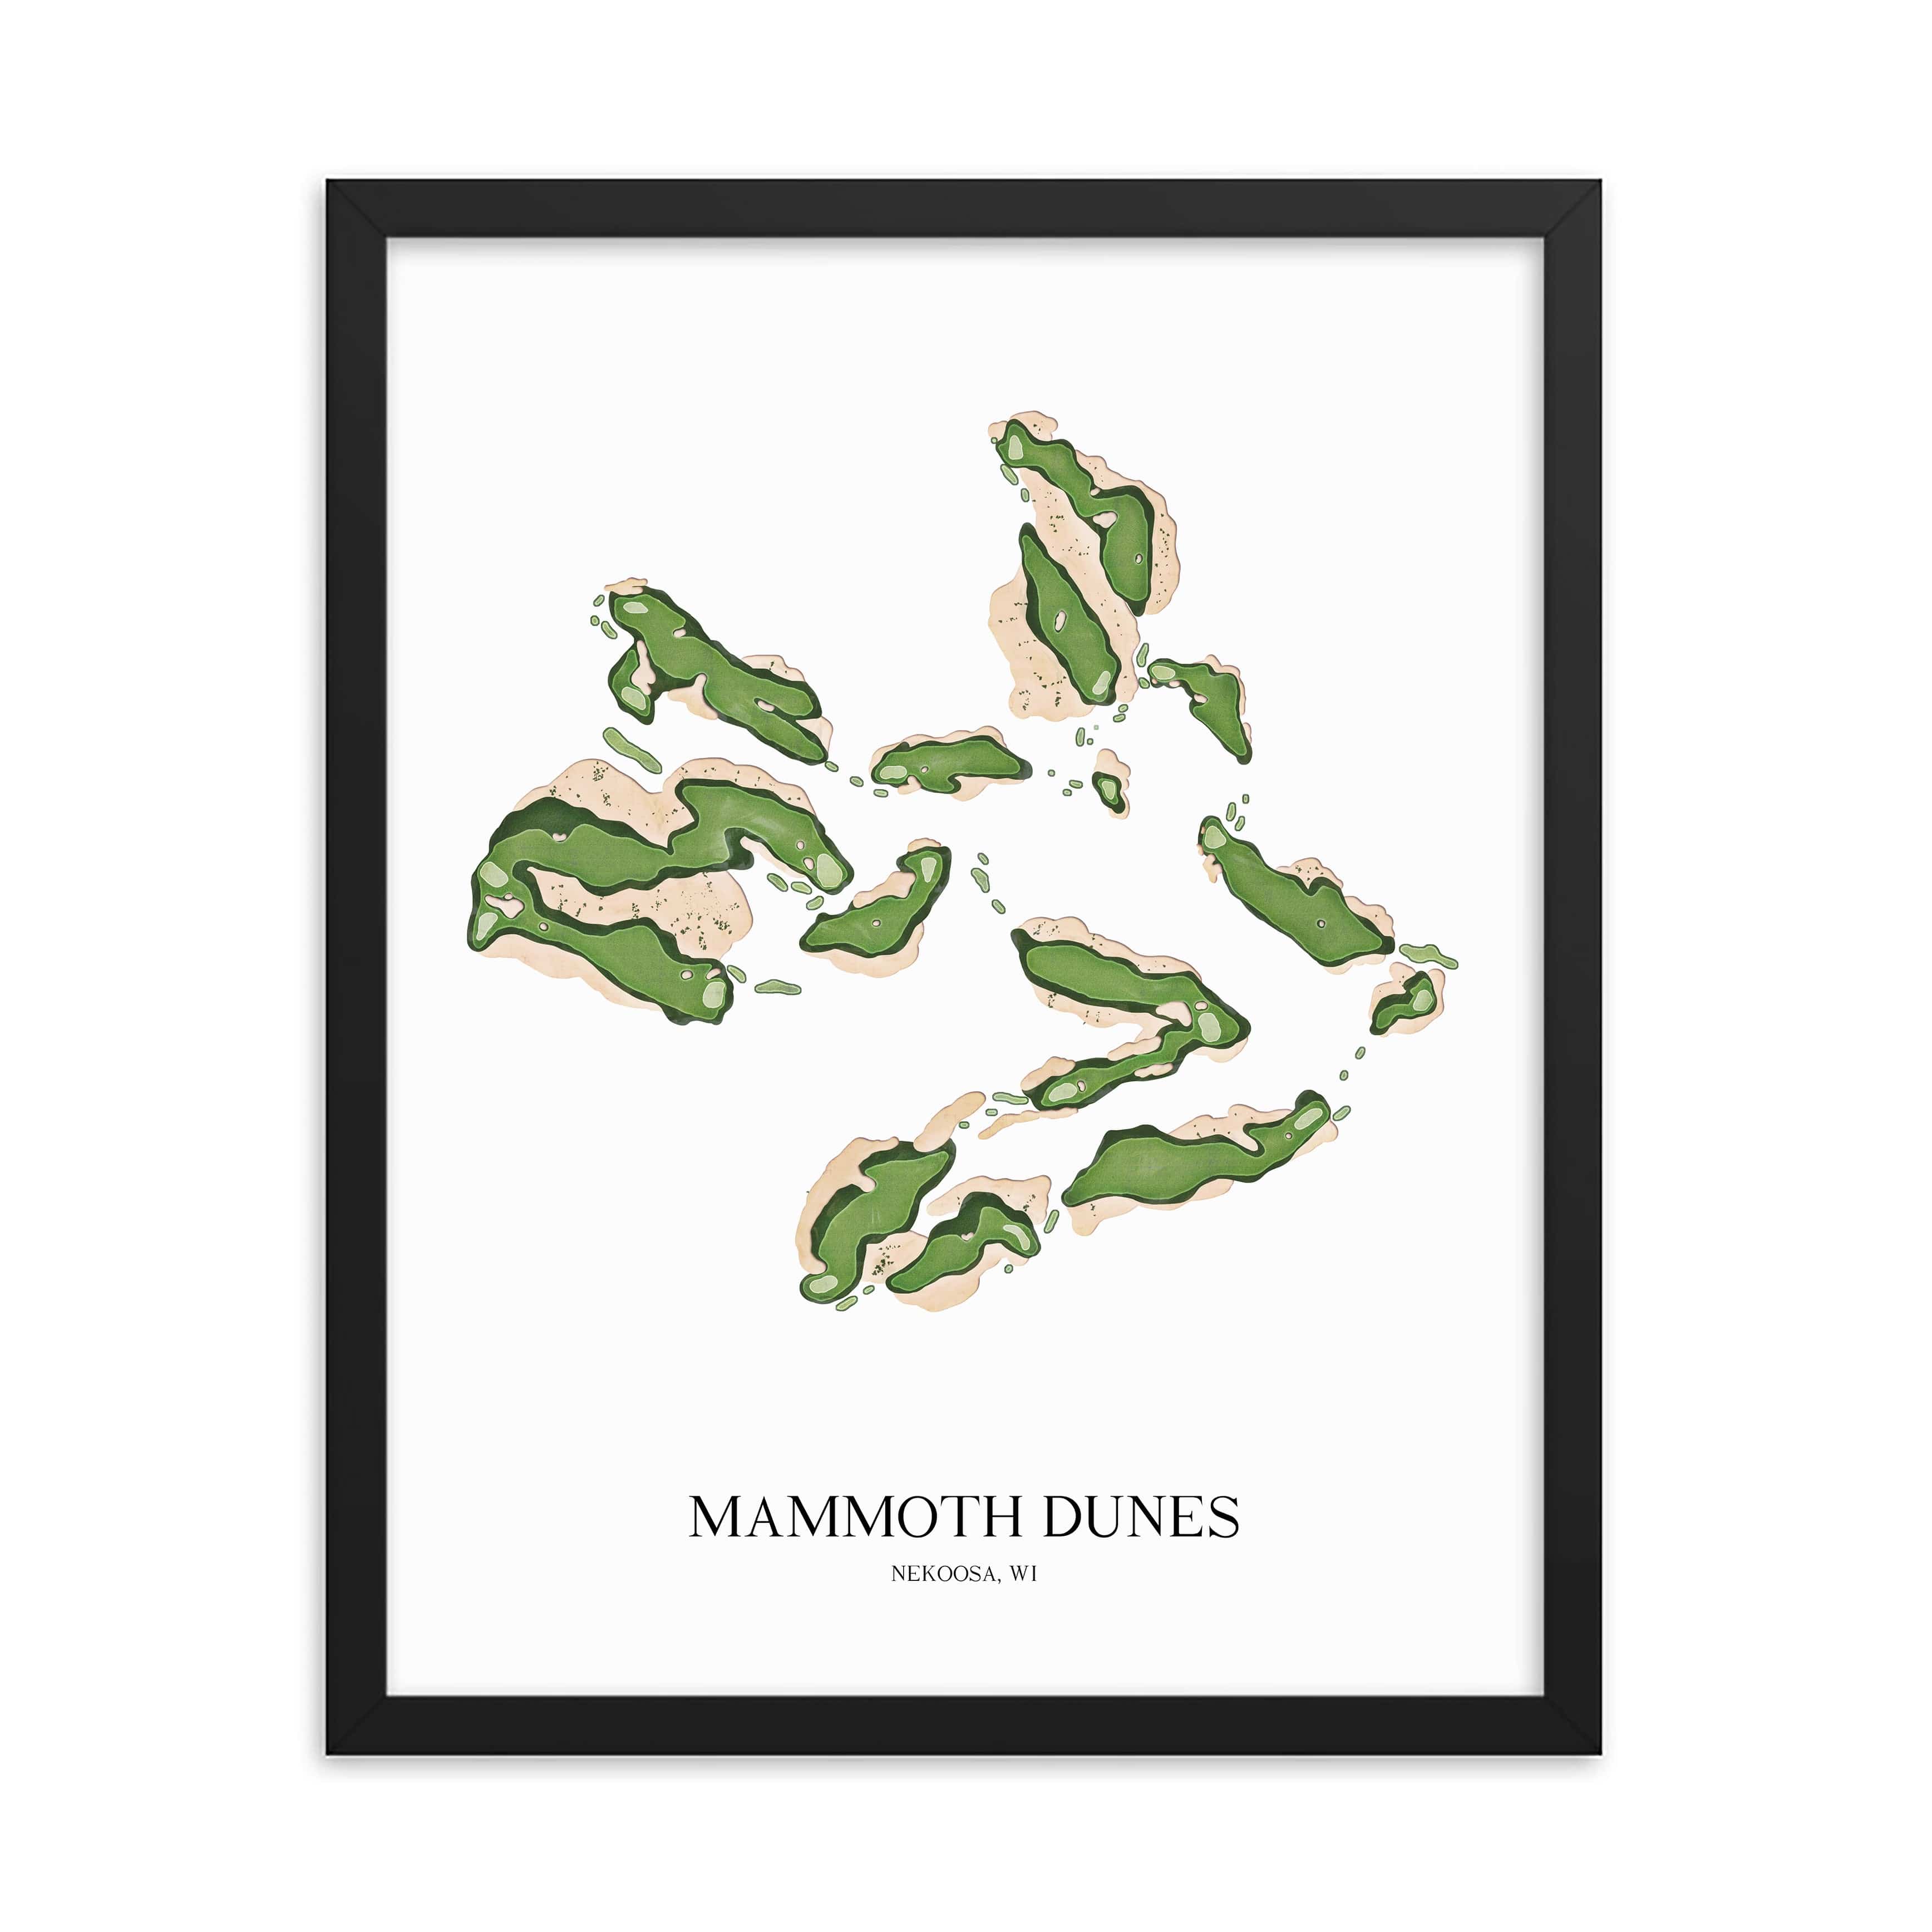 The 19th Hole Golf Shop - Golf Course Prints -  8" x 10" / Black Mammoth Dunes Golf Course Map